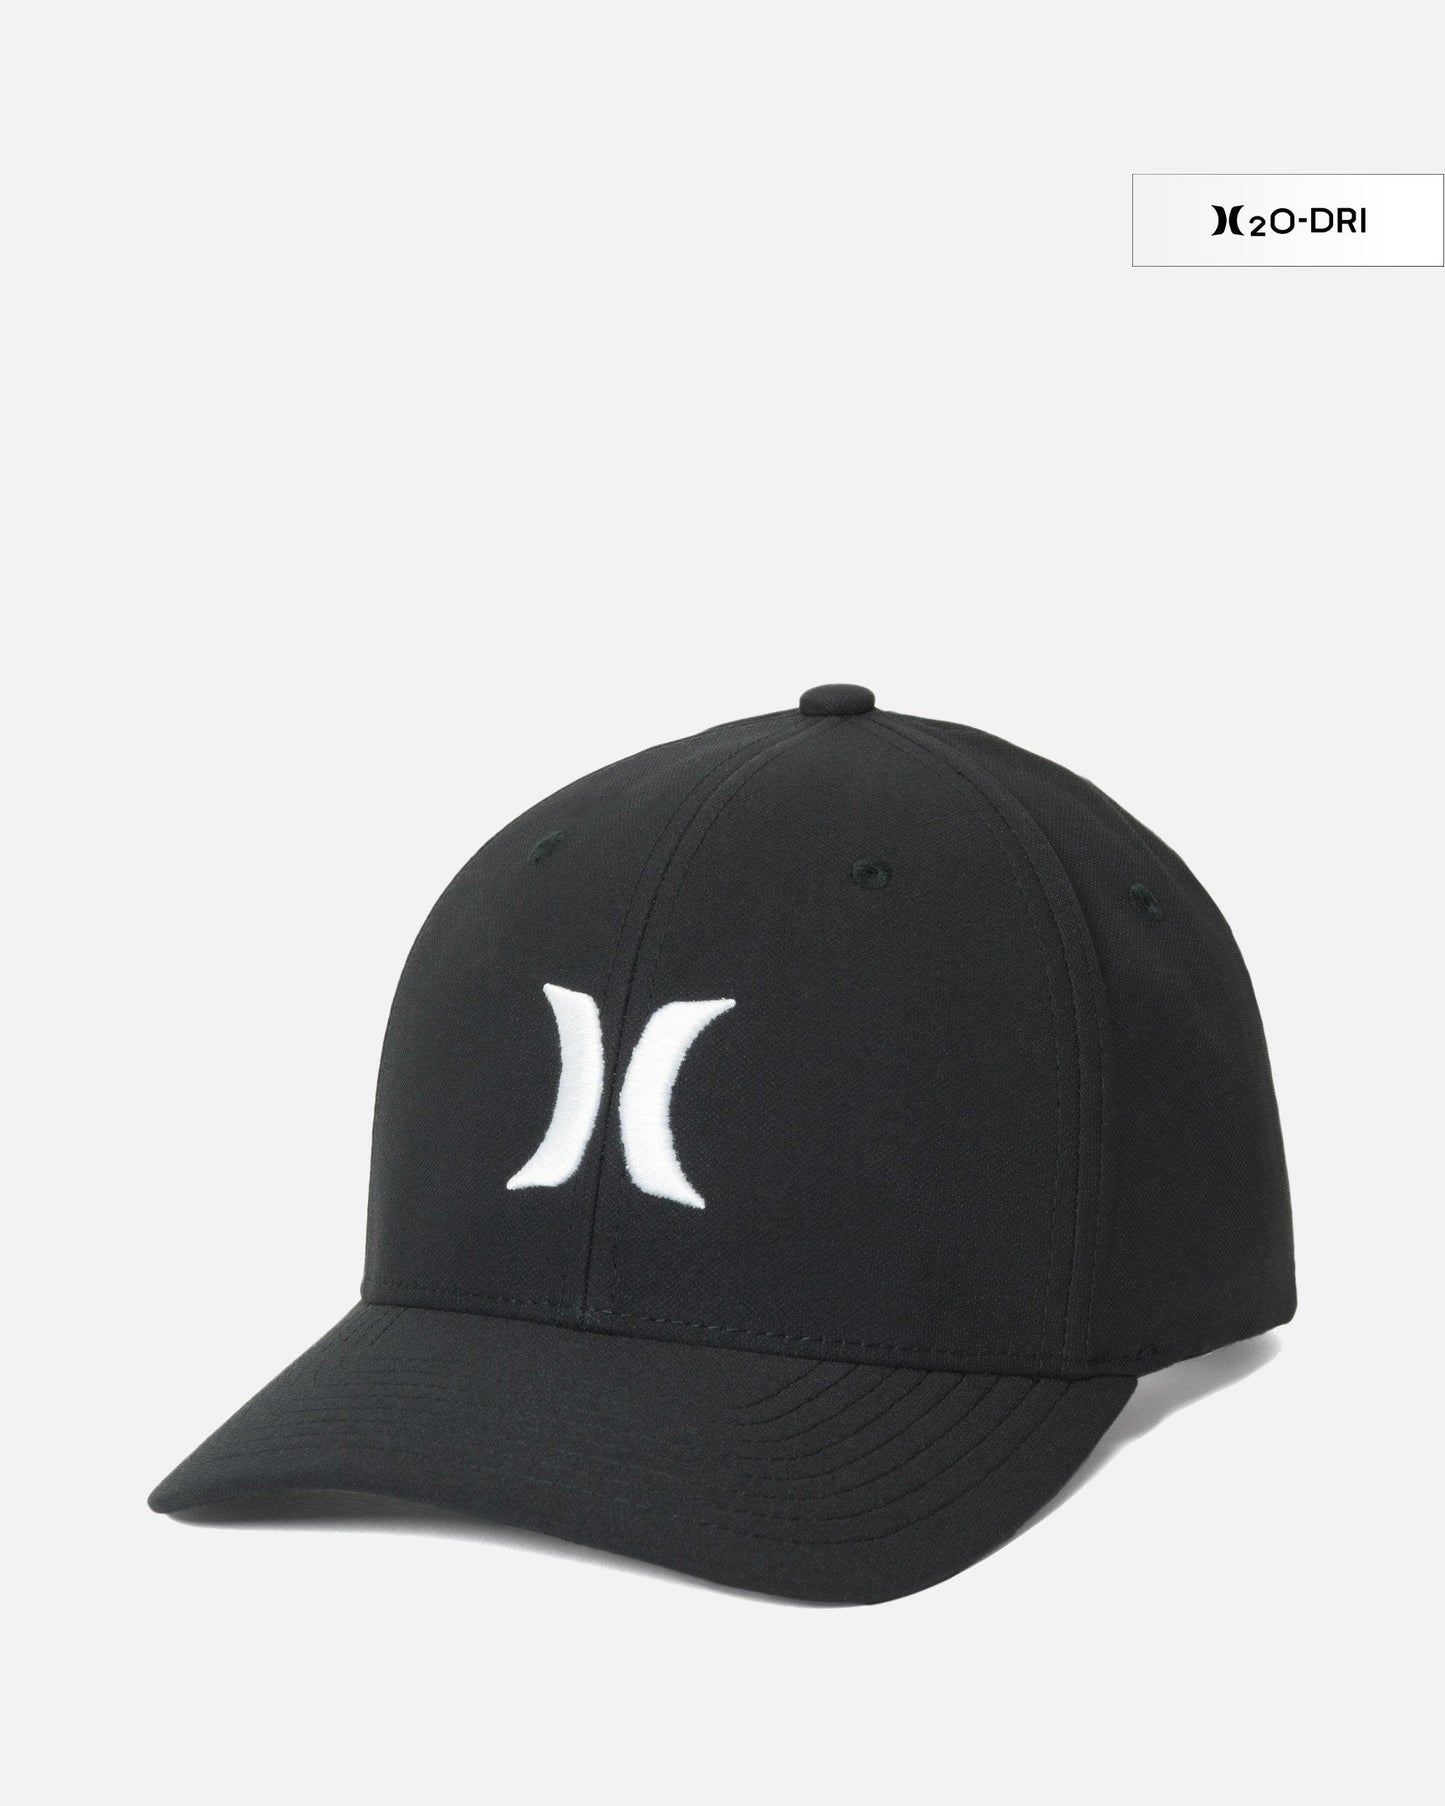 Hurley H20 DRI One And Only Hat